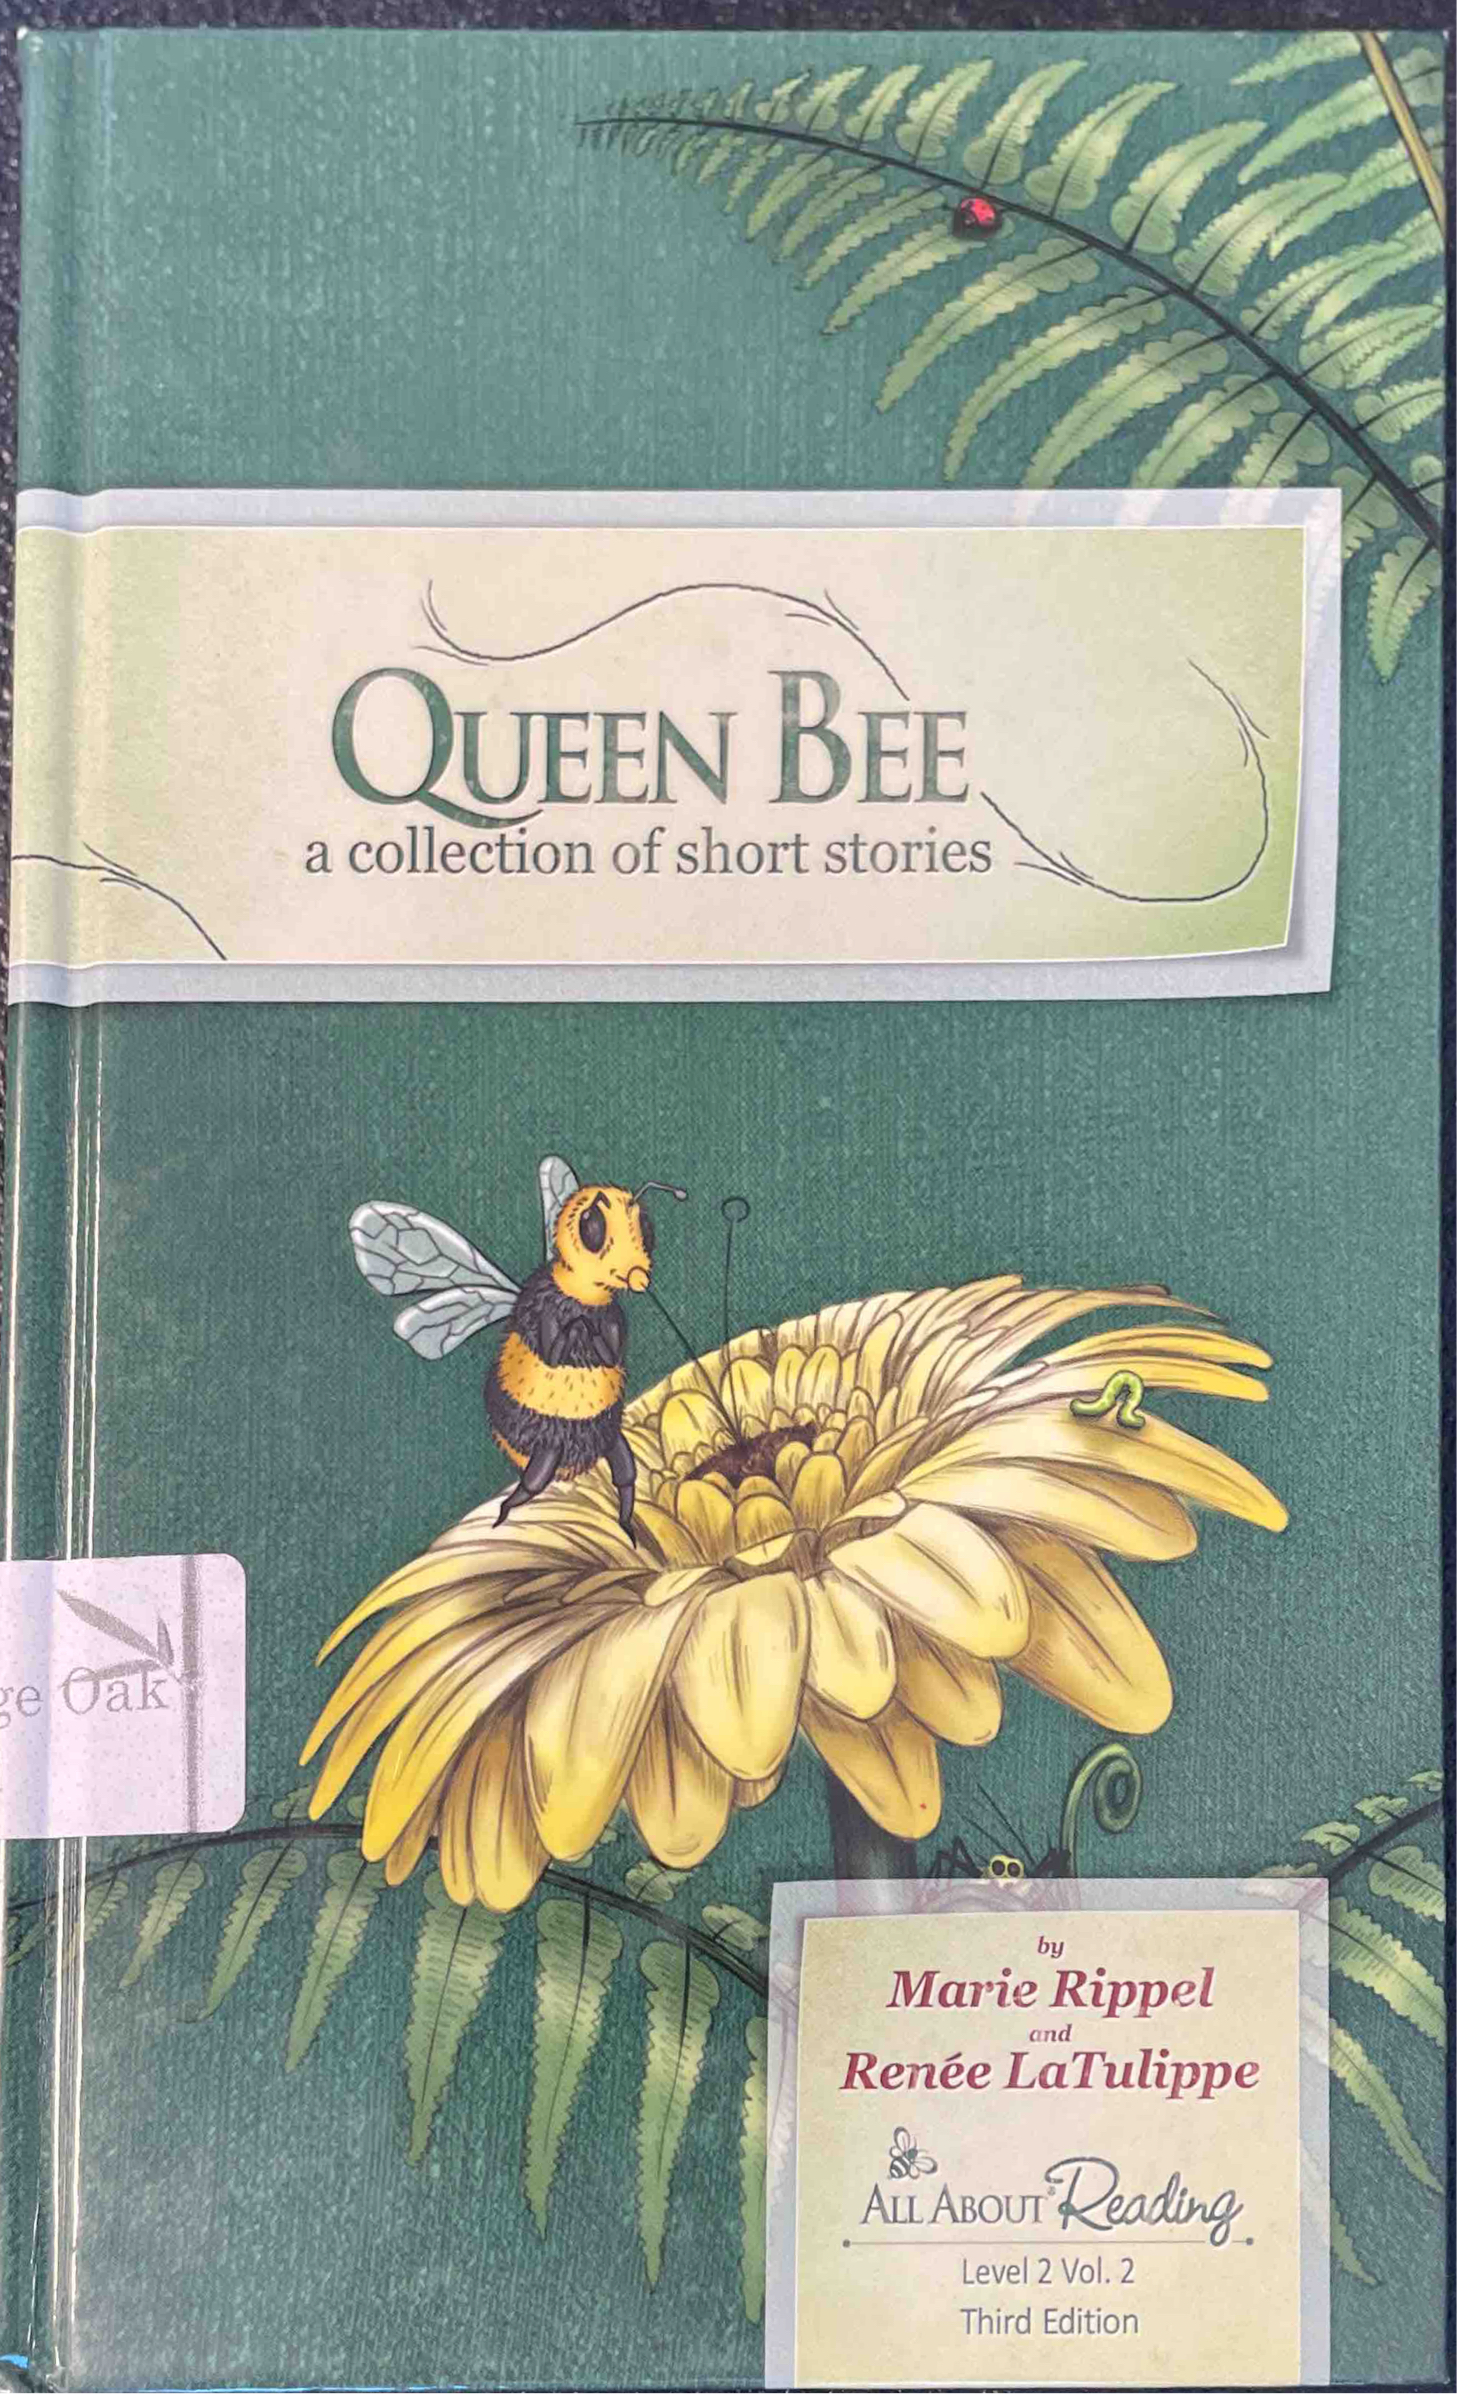 All About Reading - Queen Bee : Level 2, Volume 2